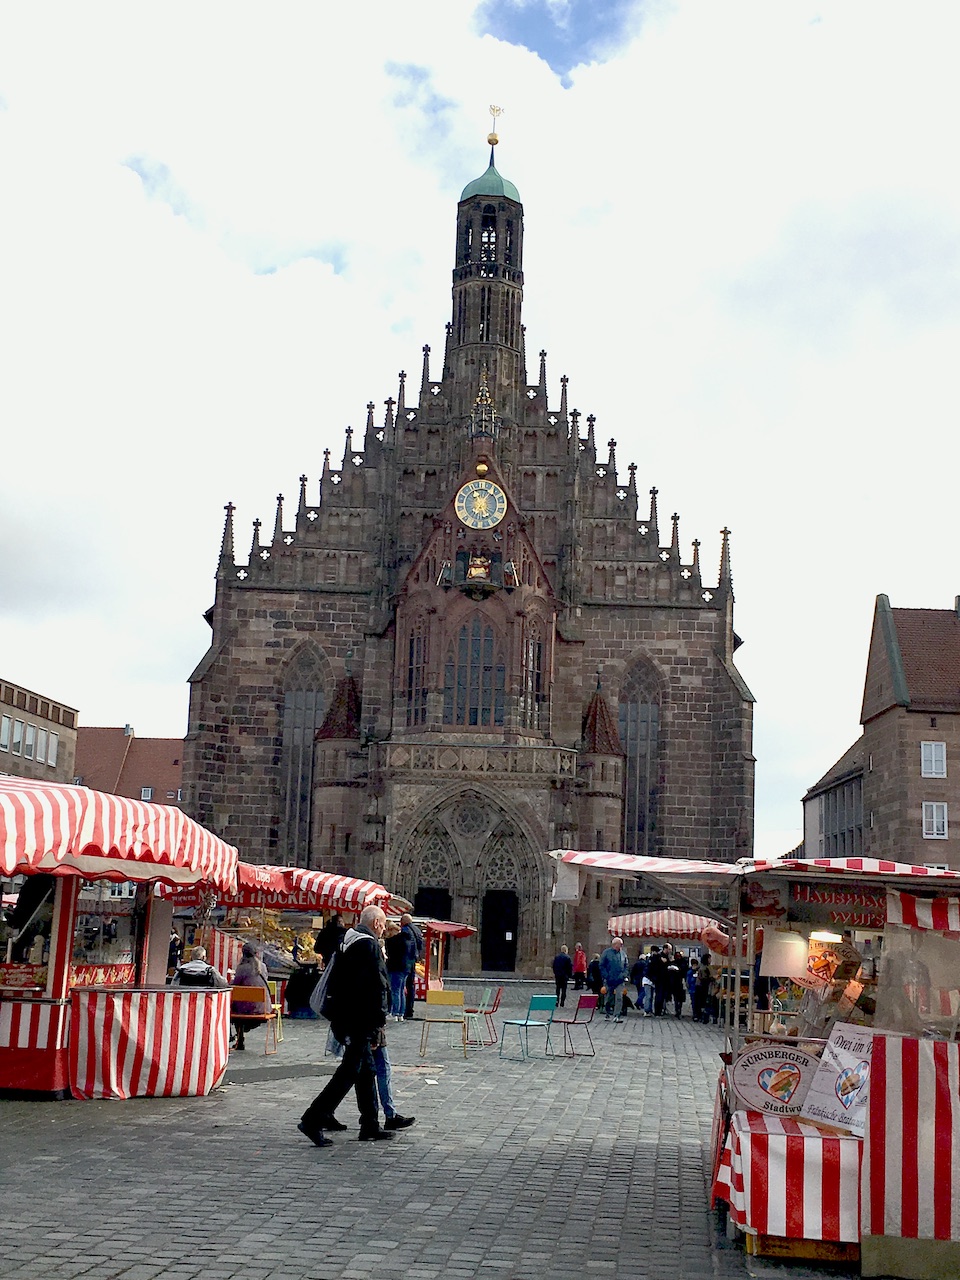 "Church of Our Lady," Nuremberg, Germany